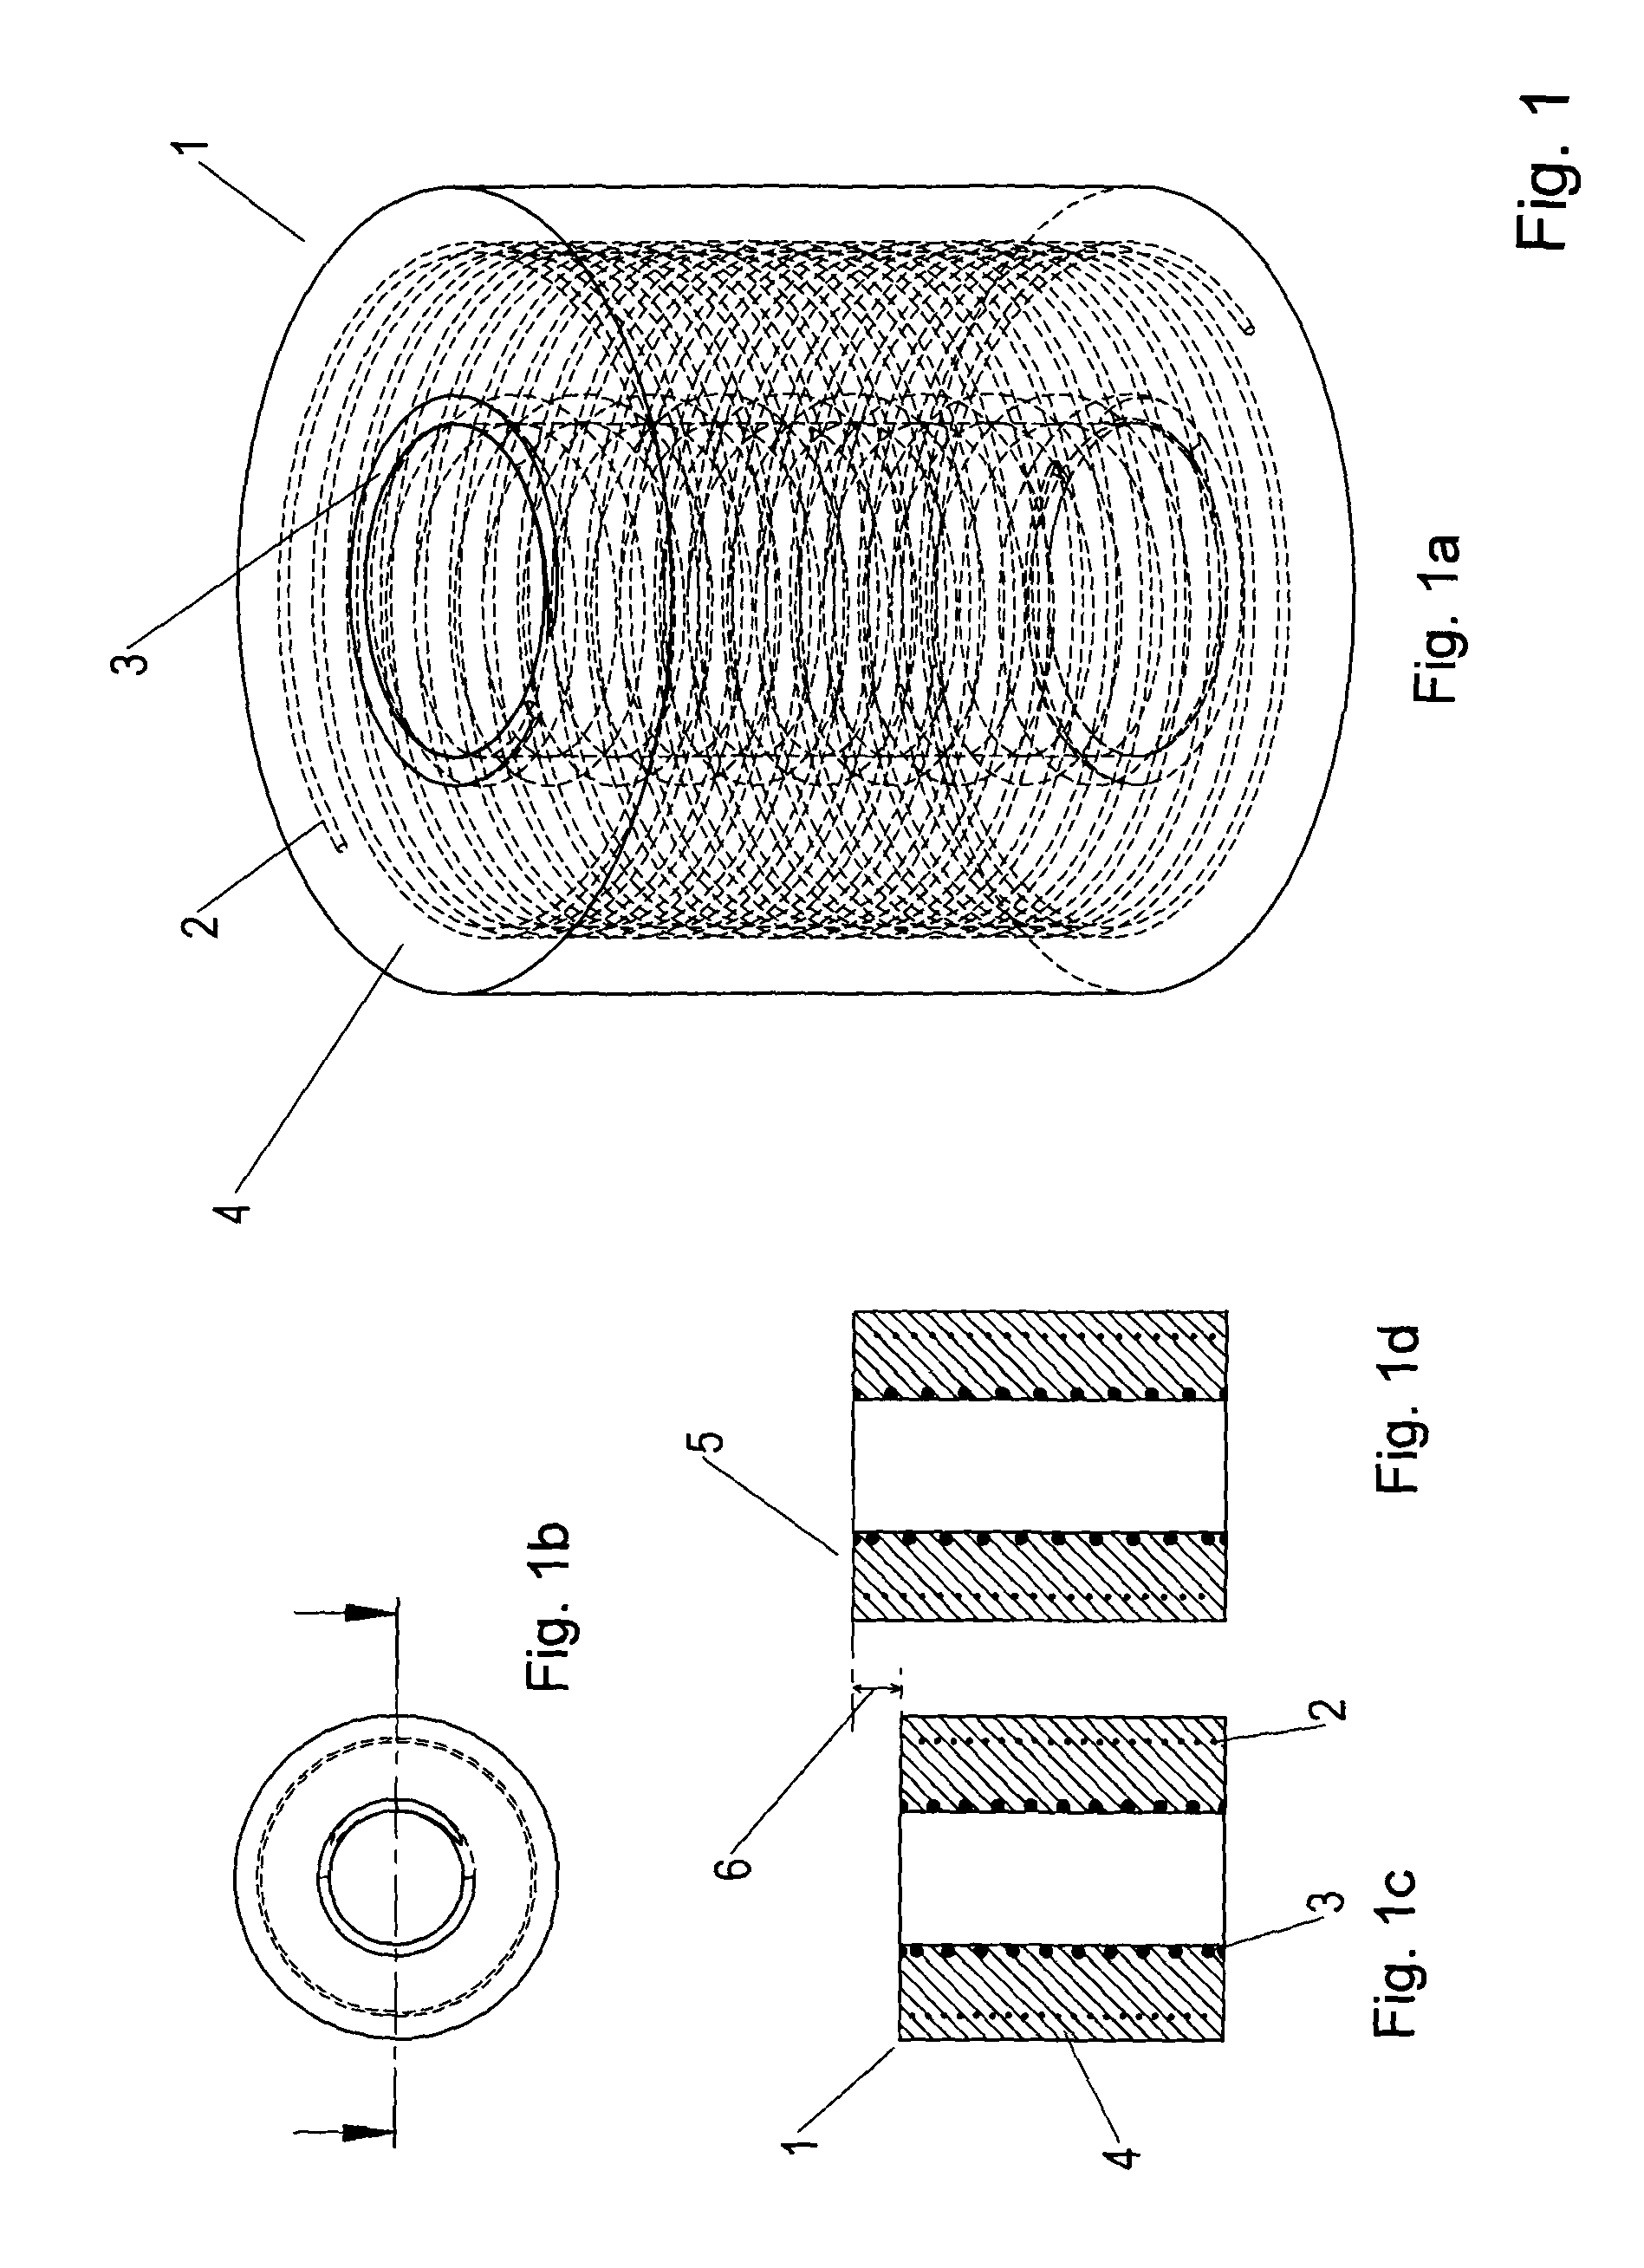 Actuator element and an actuator for generating a force and/or a movement